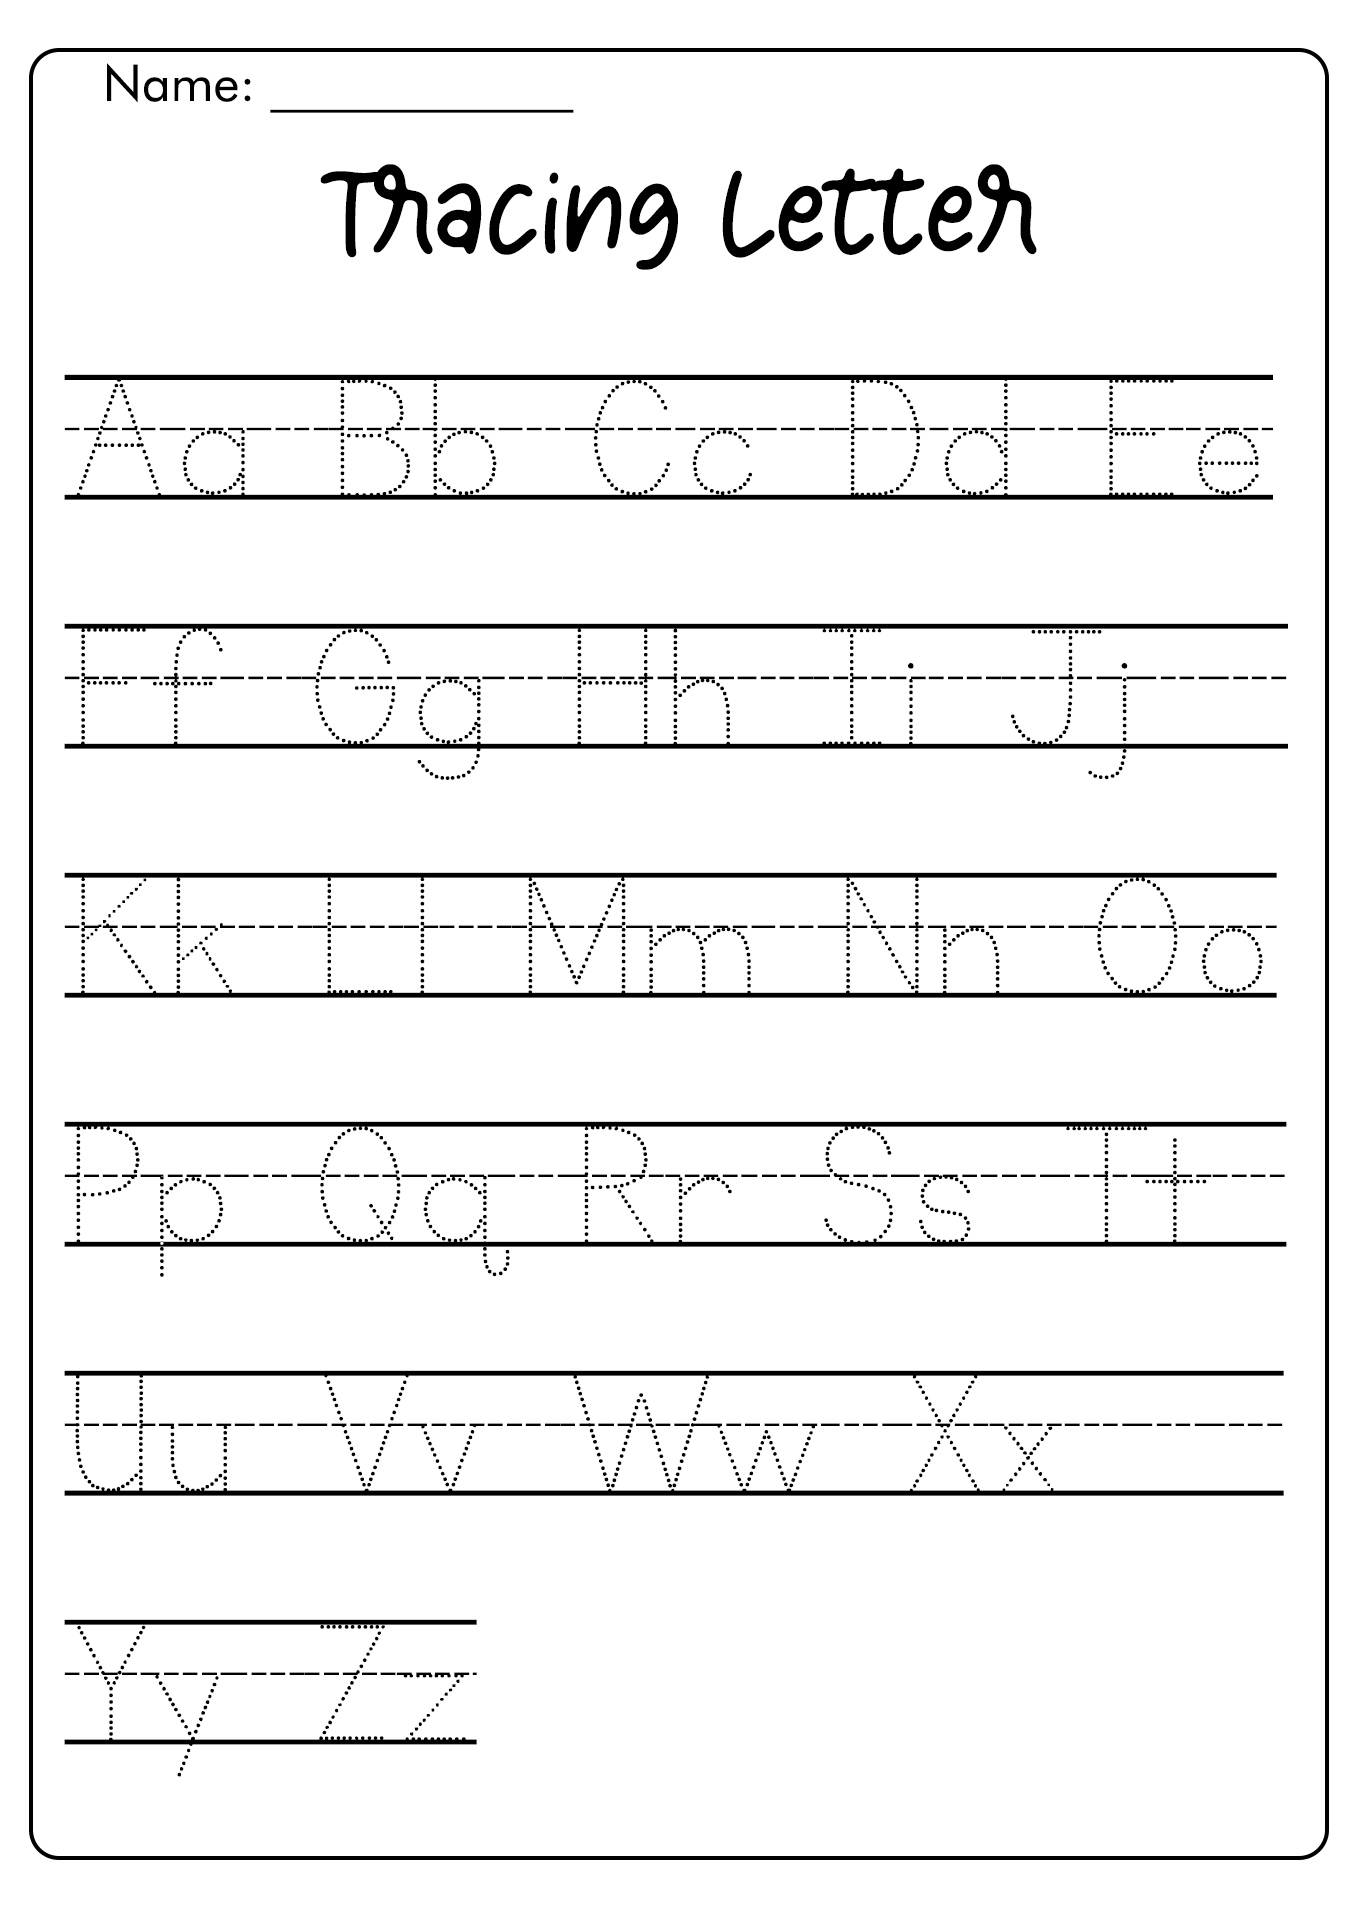 Print Tracing Letters Worksheets Names